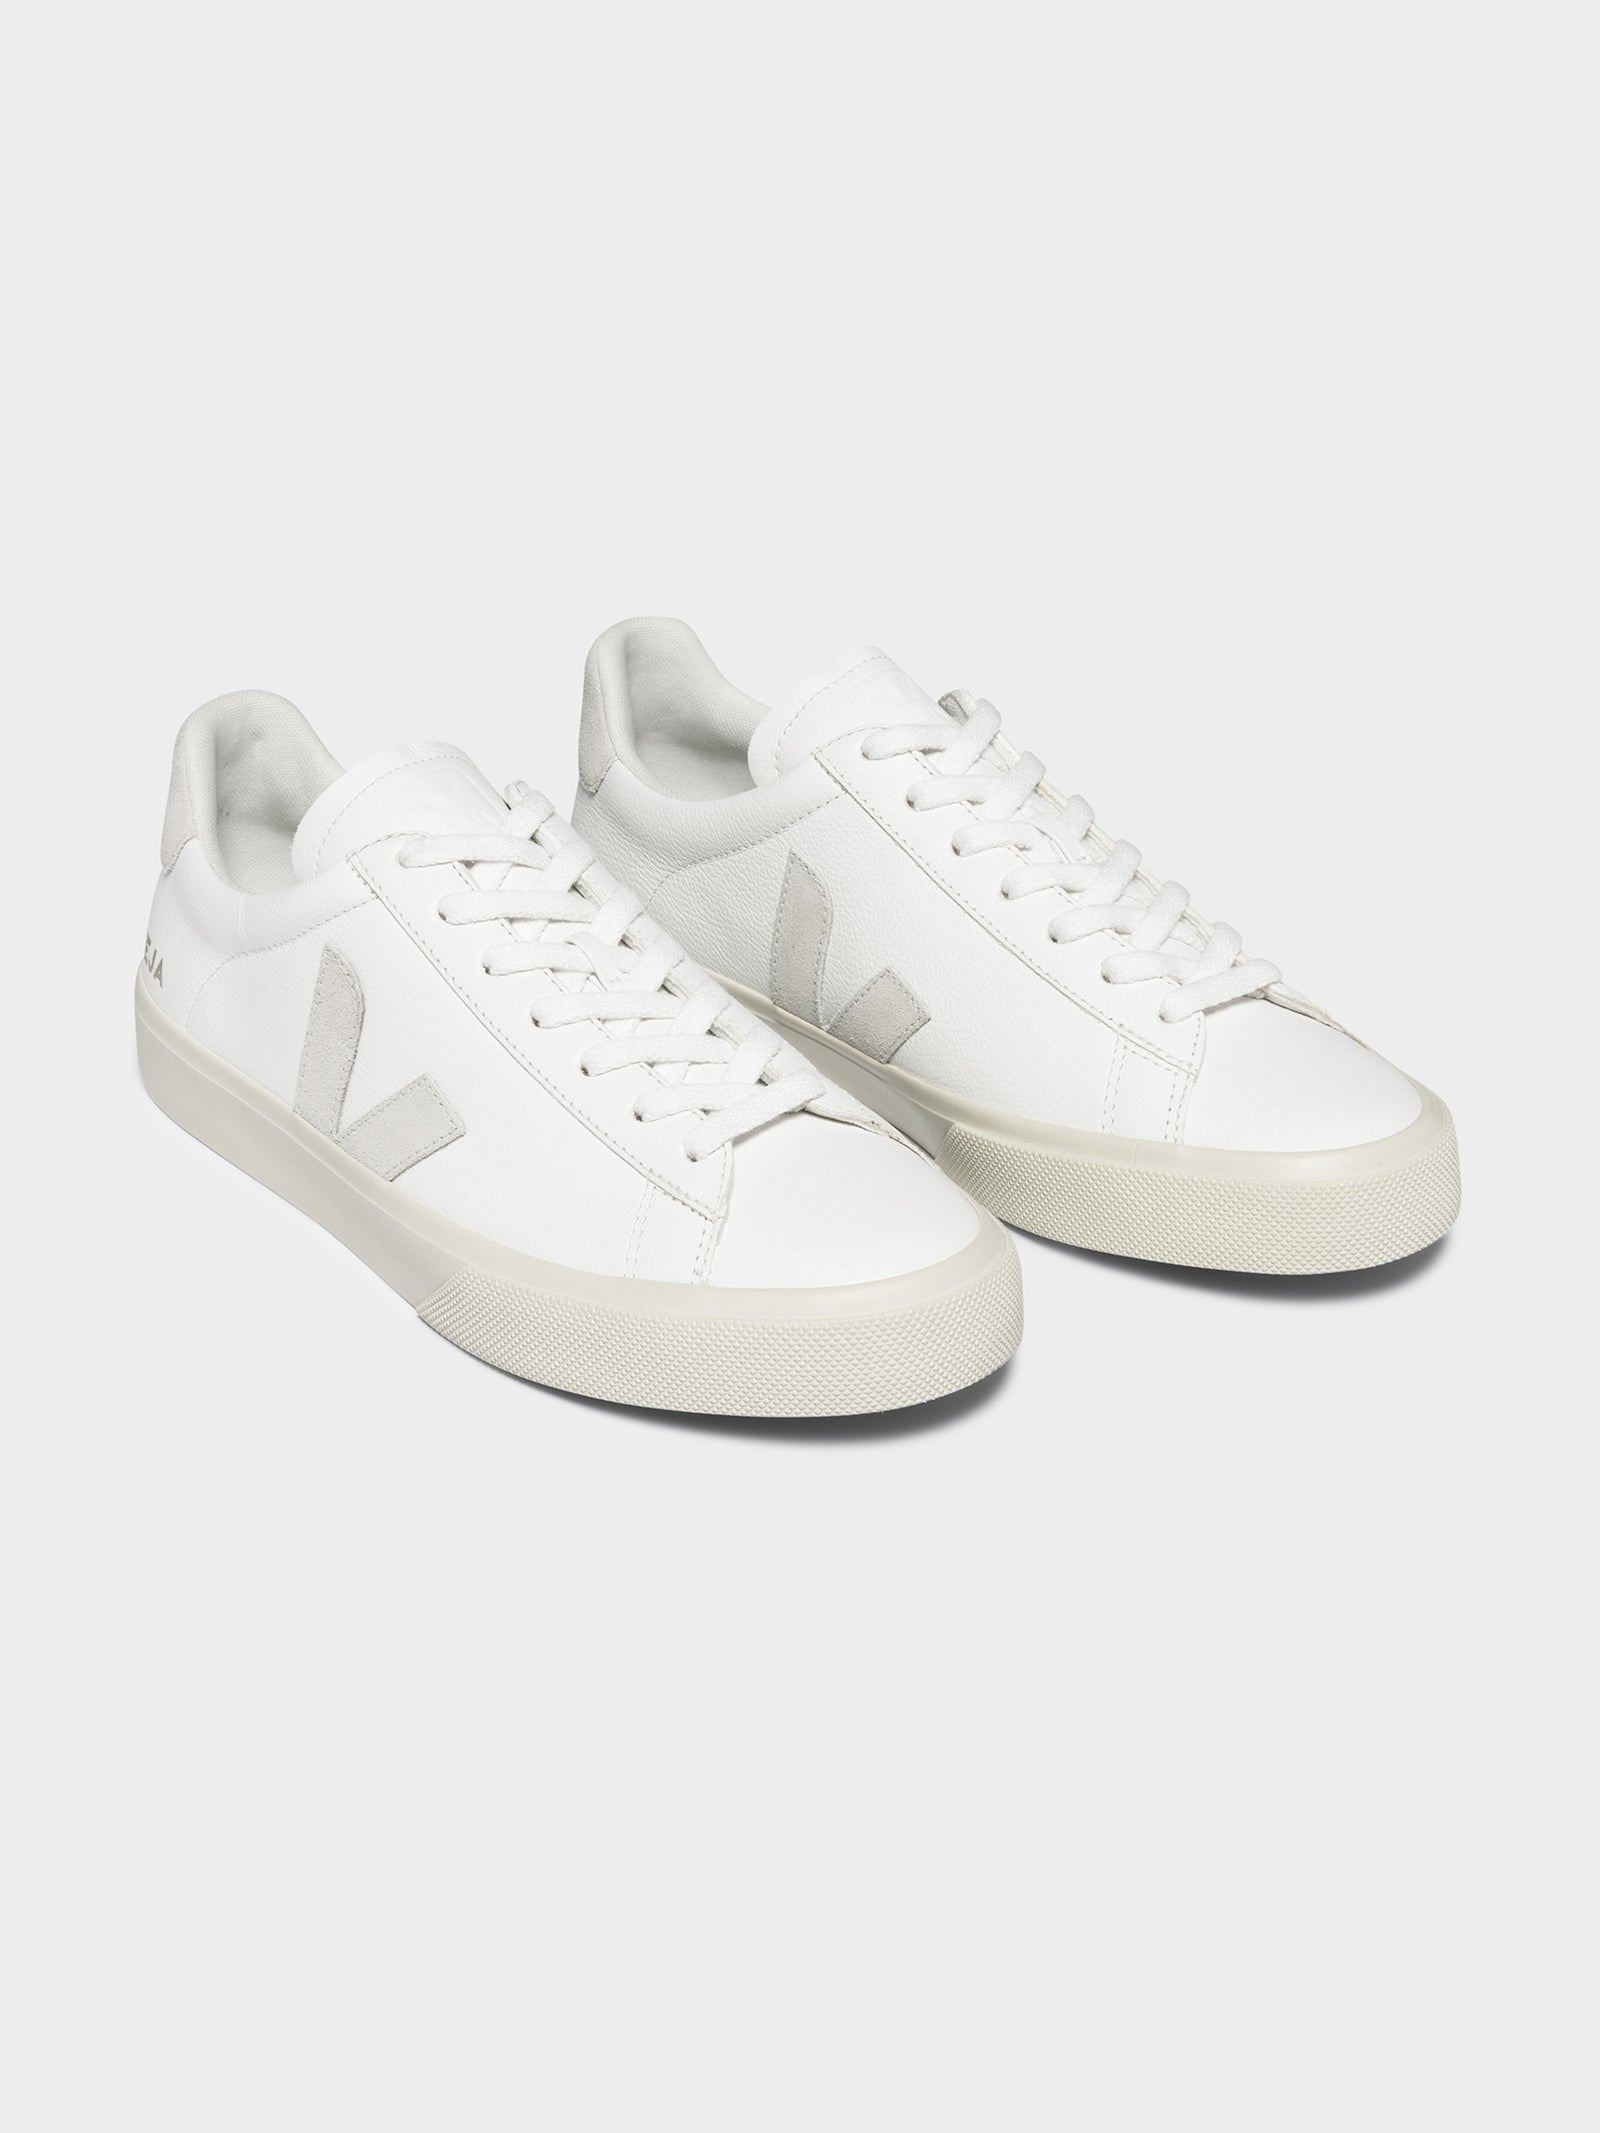 Unisex Campo Leather Sneakers in White & Beige